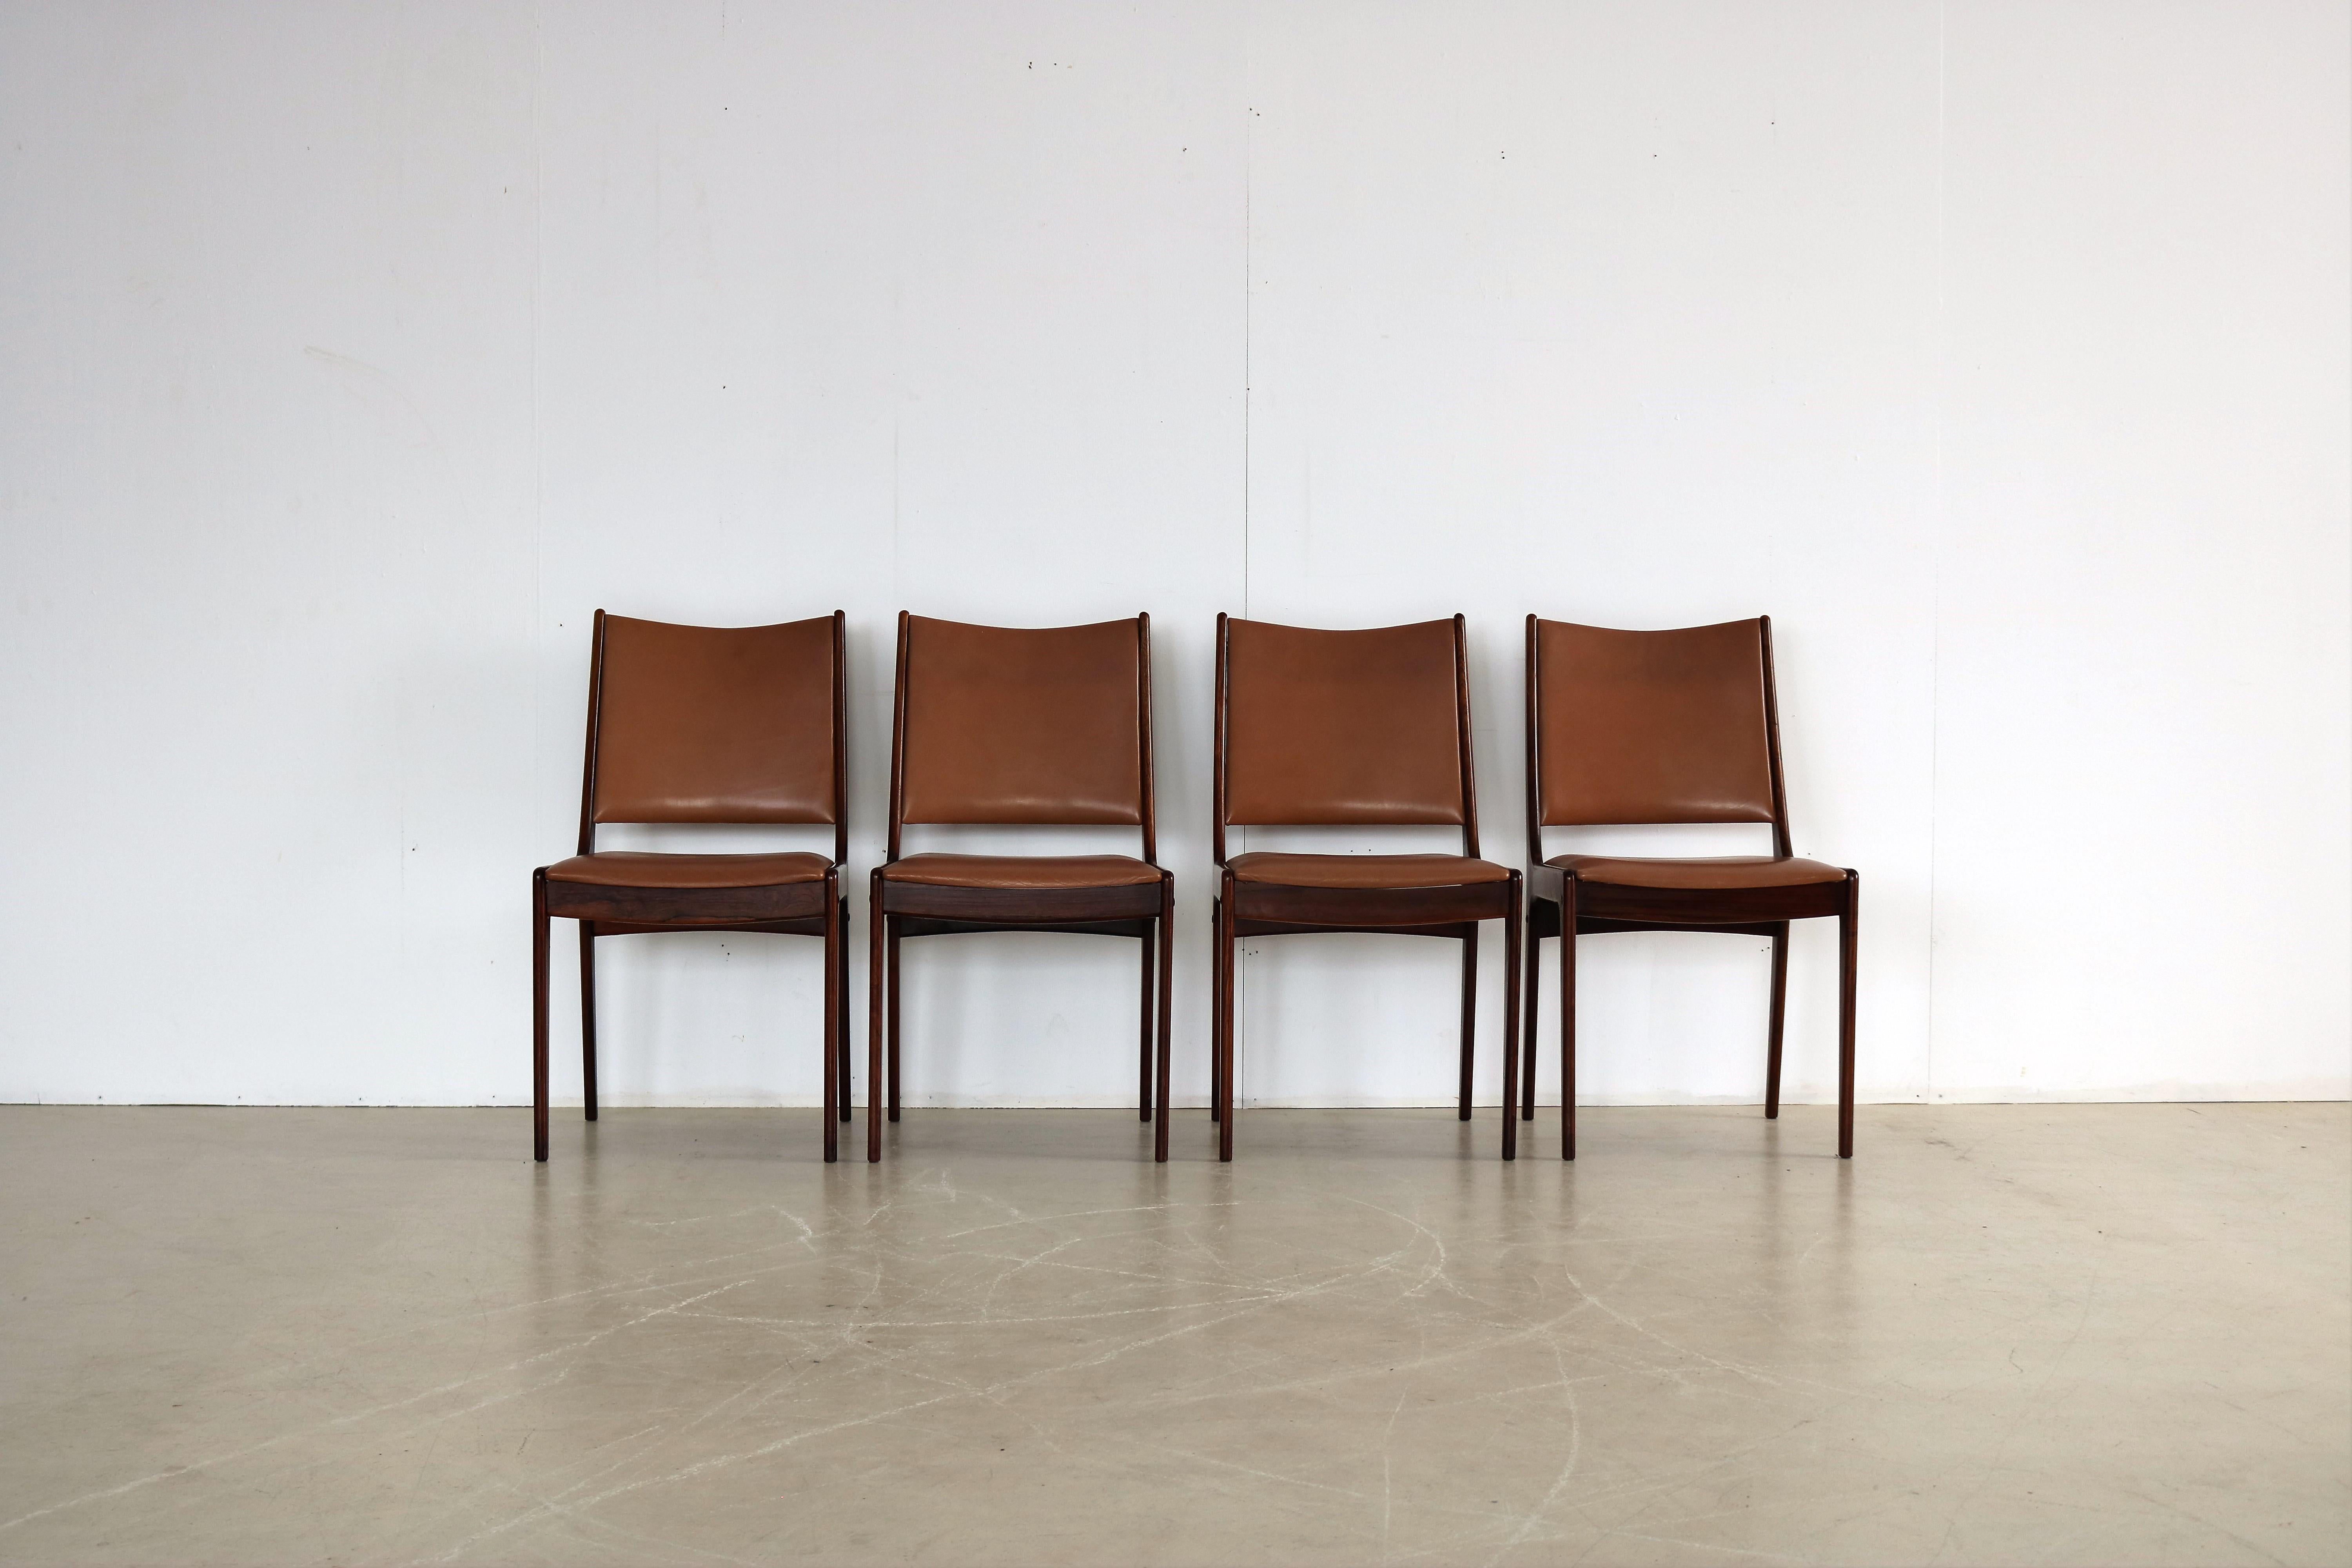 vintage dining room chairs chairs 1960s Danish

Period 1960s
designs unknown Denmark
conditions good light signs of use
size: 85 x 45 x 50 (H x W x D) seat height 44 cm.

Details rosewood; skate; set of 4;

Article number 1925.